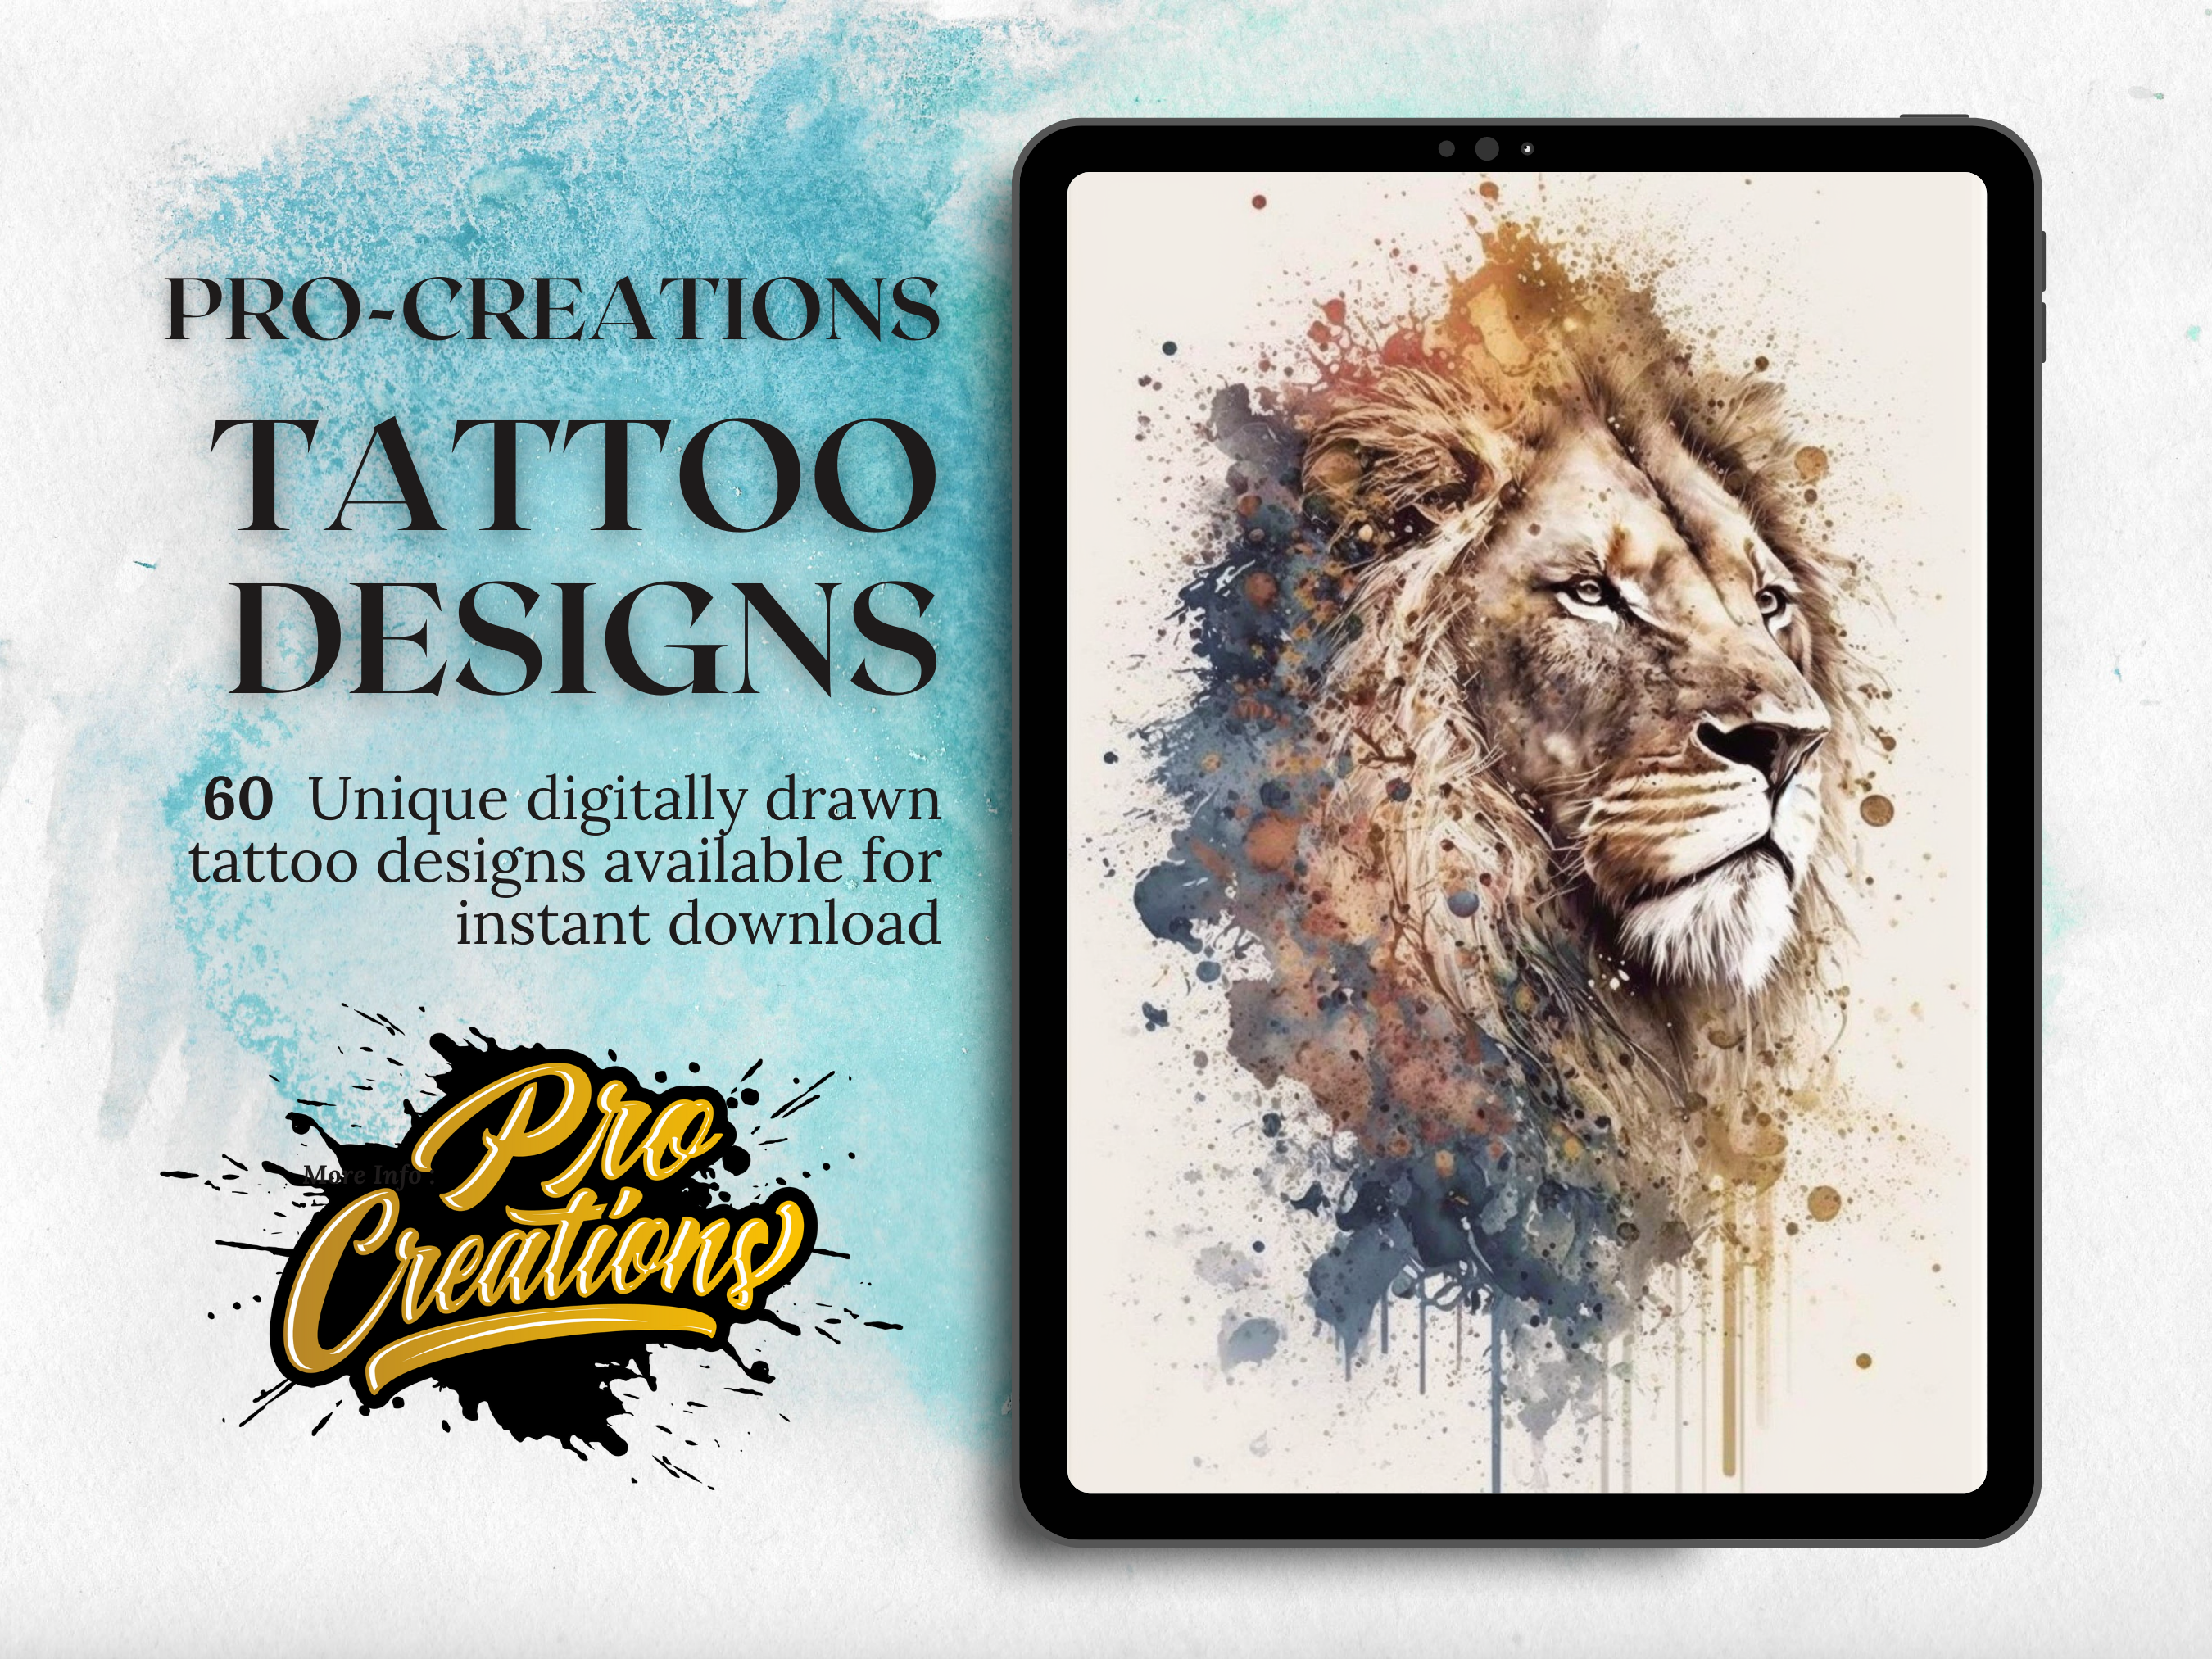 Big Cats Watercolour Tattoo Designs | PDF Reference Designs for Tattoos